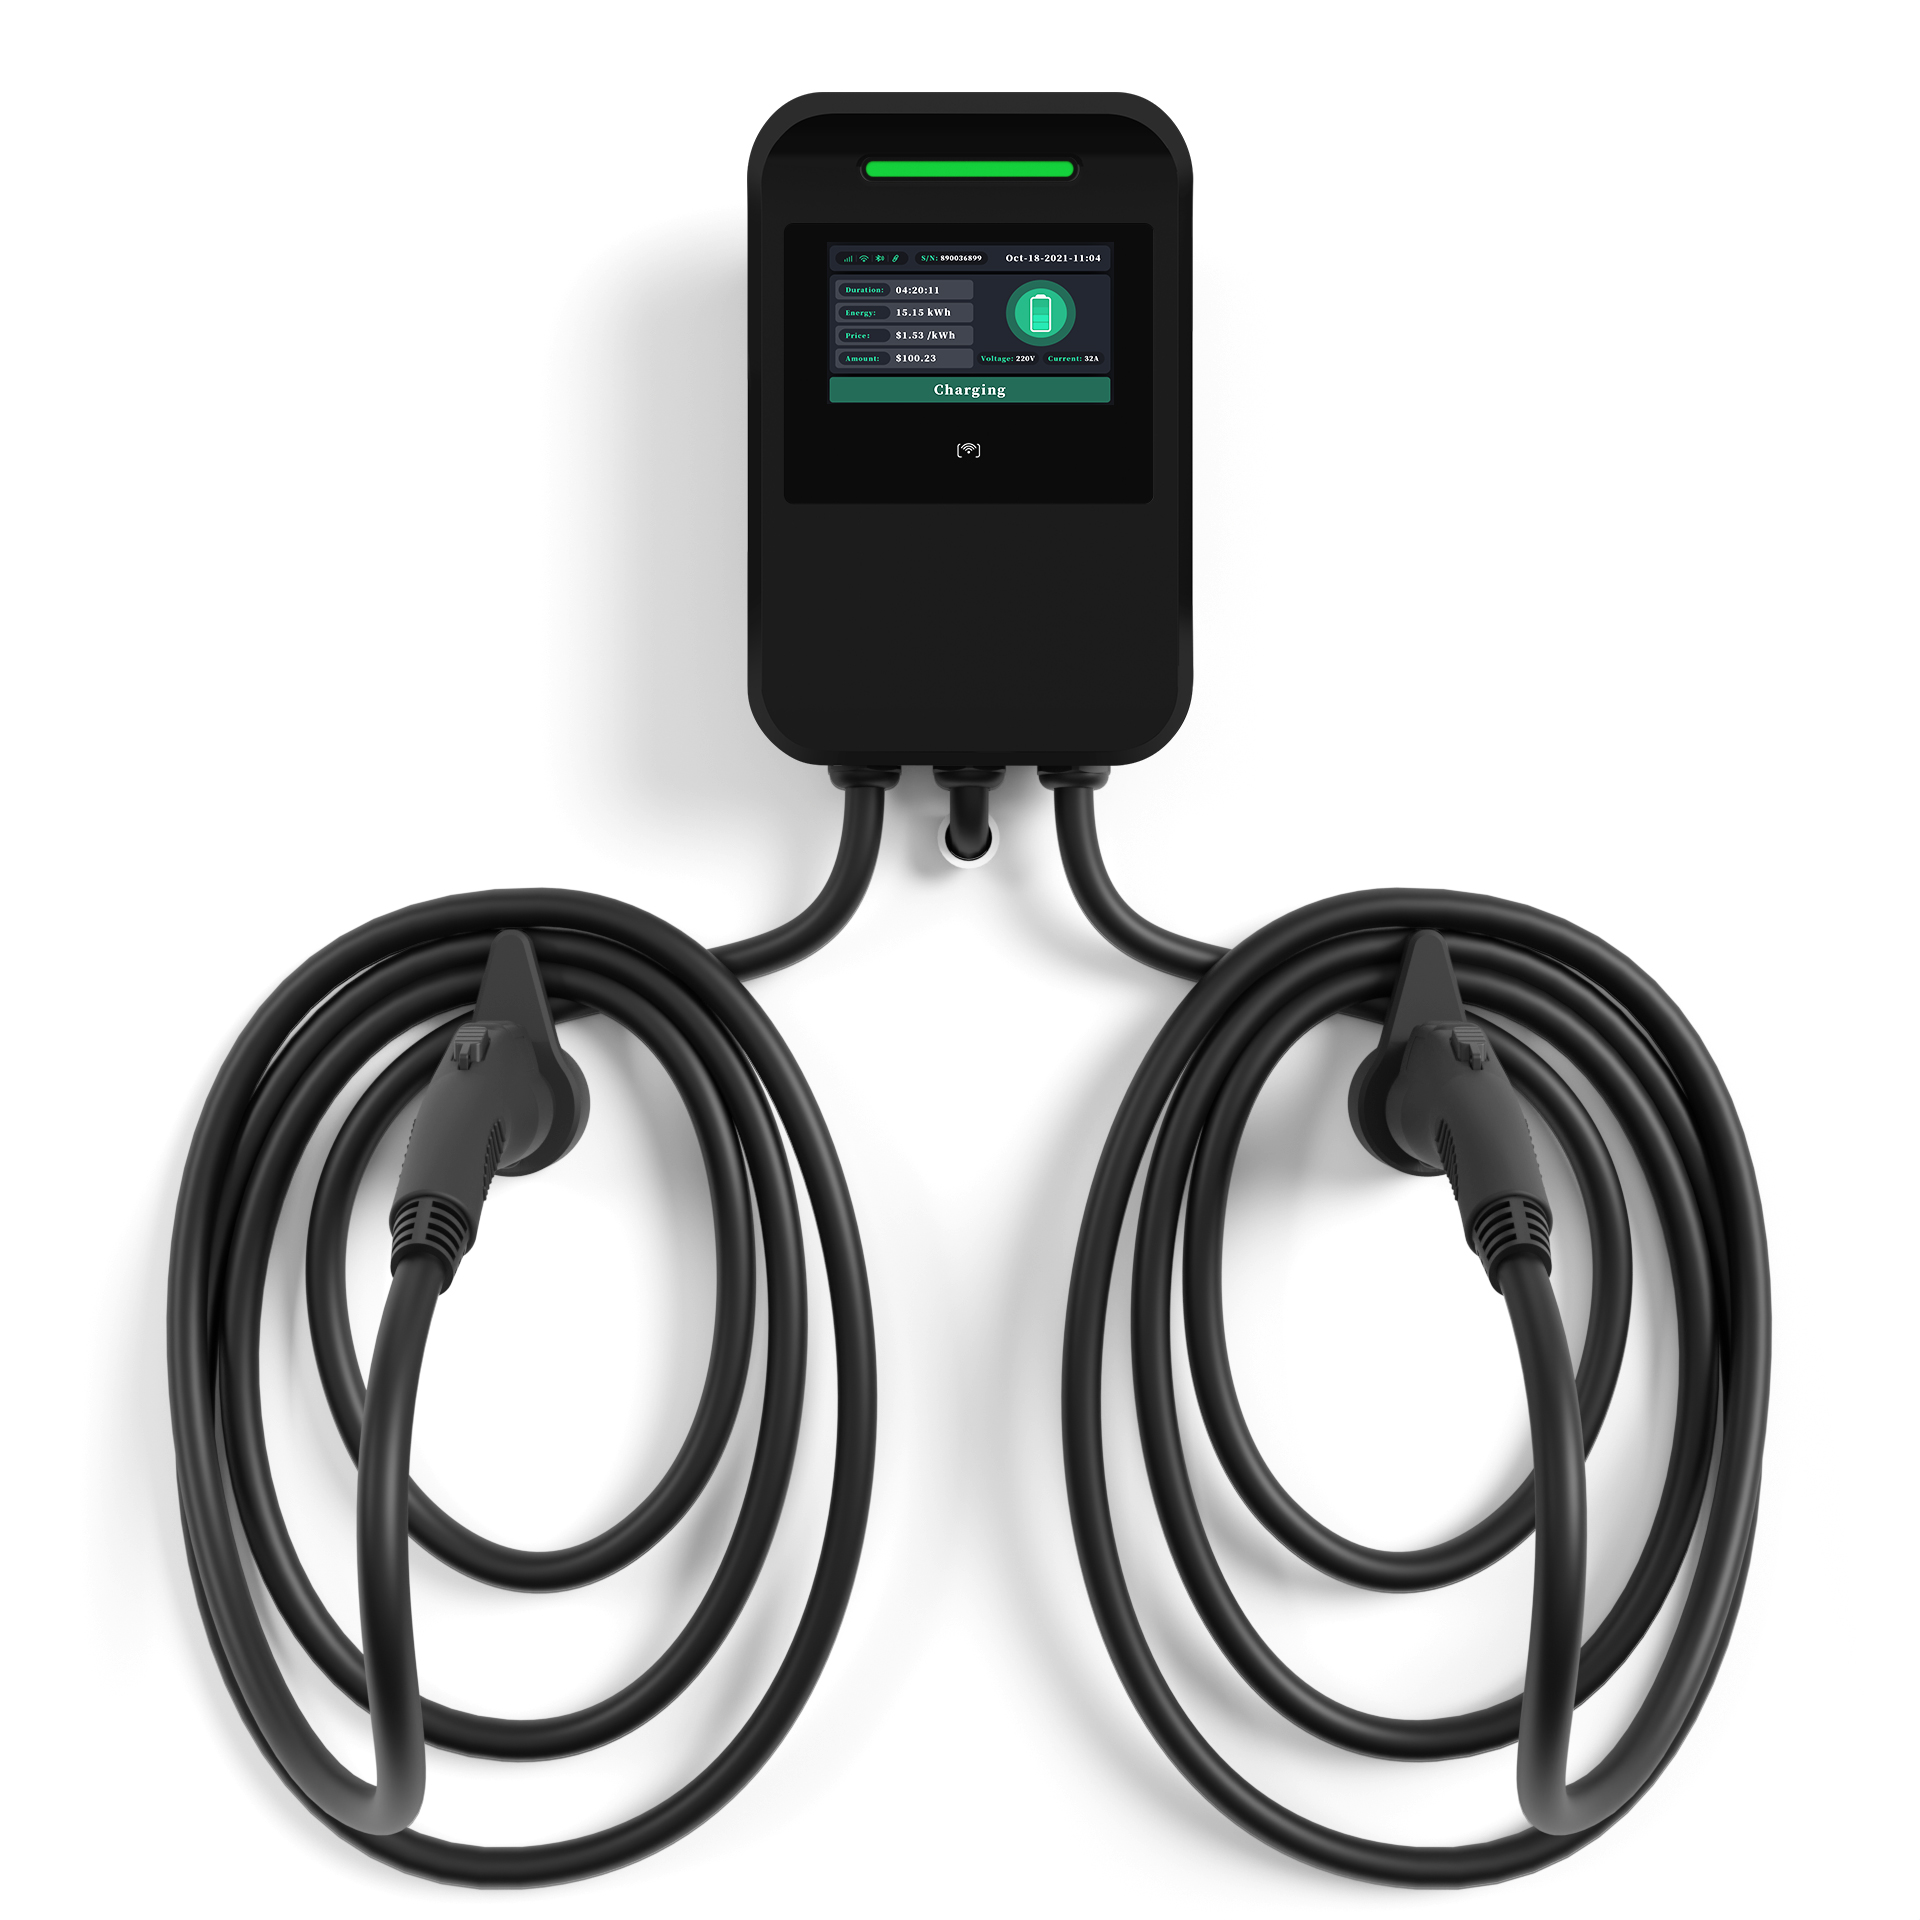 Why We Need Dual Port Charger for Public EV Infrastructure